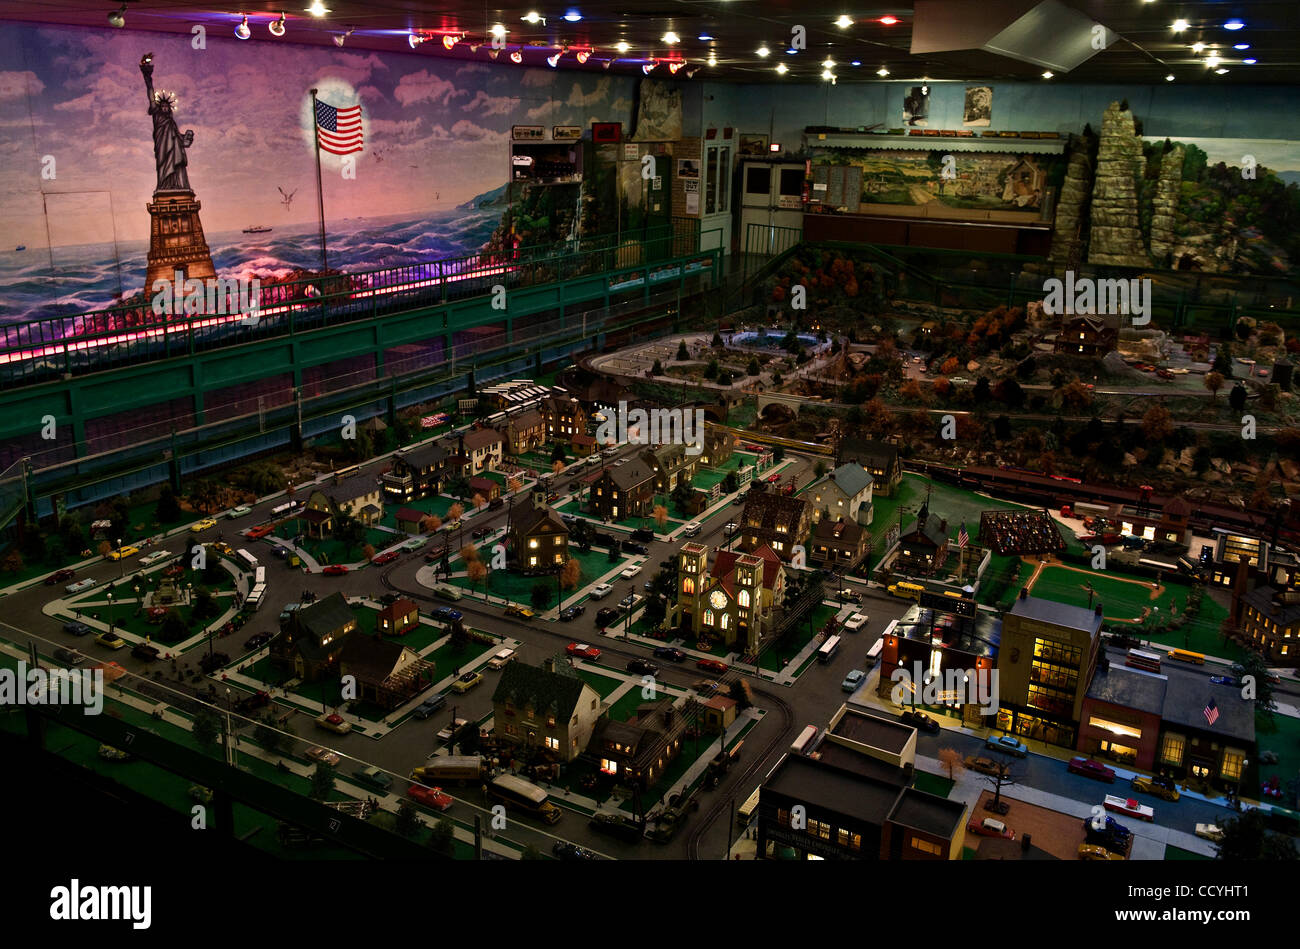 March 18, 2010 - Shartlesville, Pennsylvania, USA -  A small portion of Roadside America, the self-proclaimed 'World's Greatest Indoor Miniature Village.'  The 7,000 square foot display, including some 400 minutely detailed, miniature buildings and 4,000 people, a panorama of life in small town Amer Stock Photo